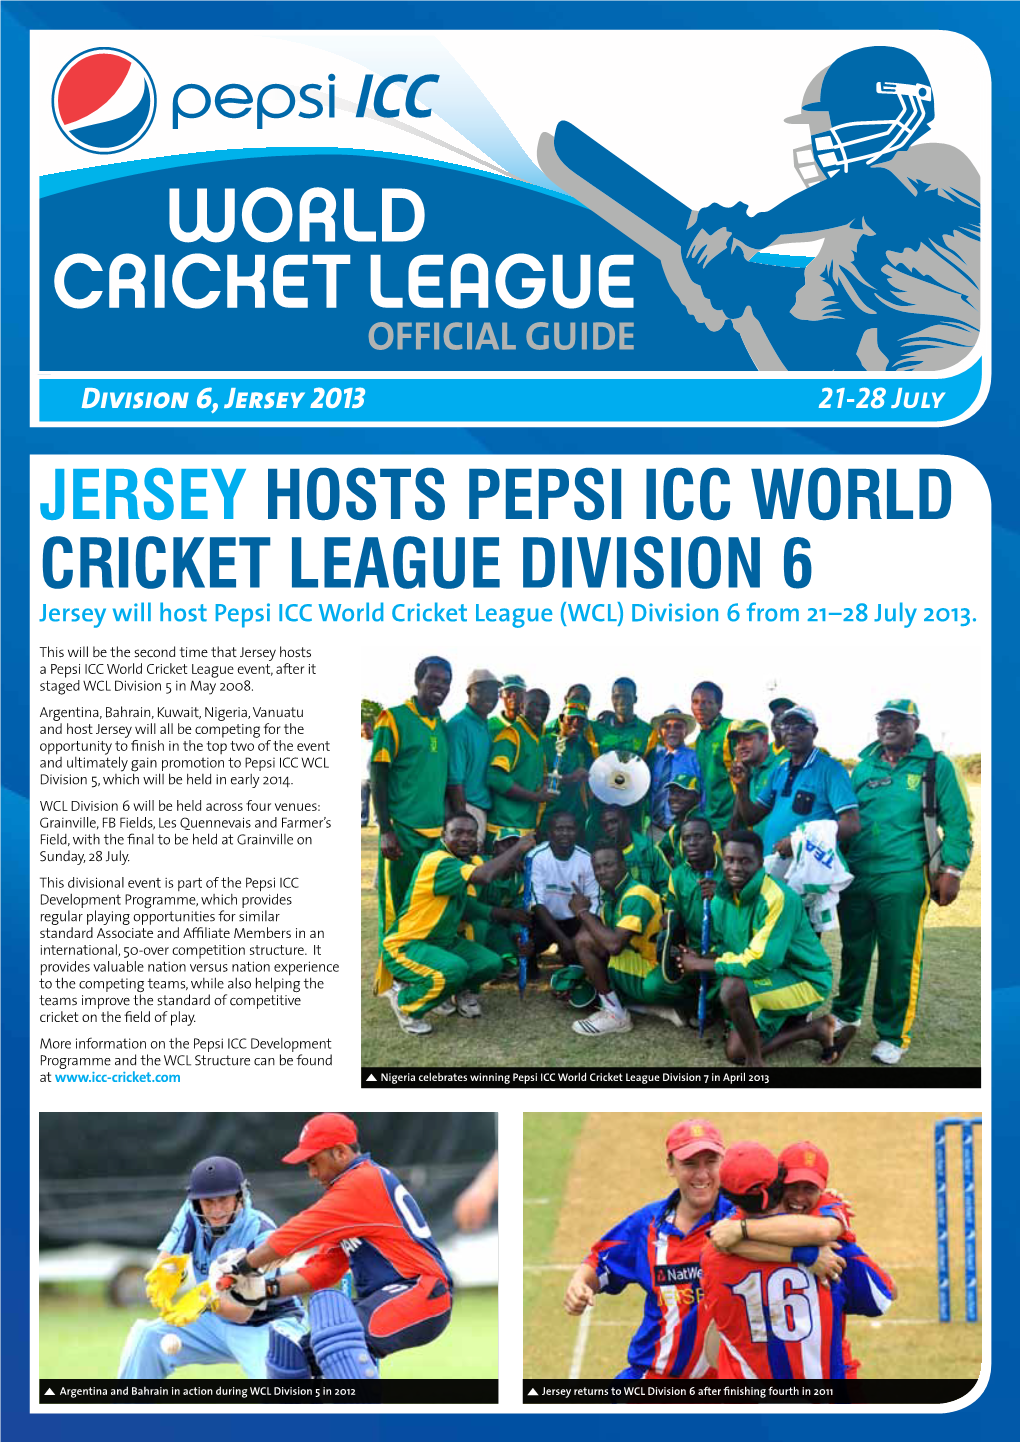 Jersey Hosts Pepsi ICC World Cricket League Division 6 Jersey Will Host Pepsi ICC World Cricket League (WCL) Division 6 from 21–28 July 2013